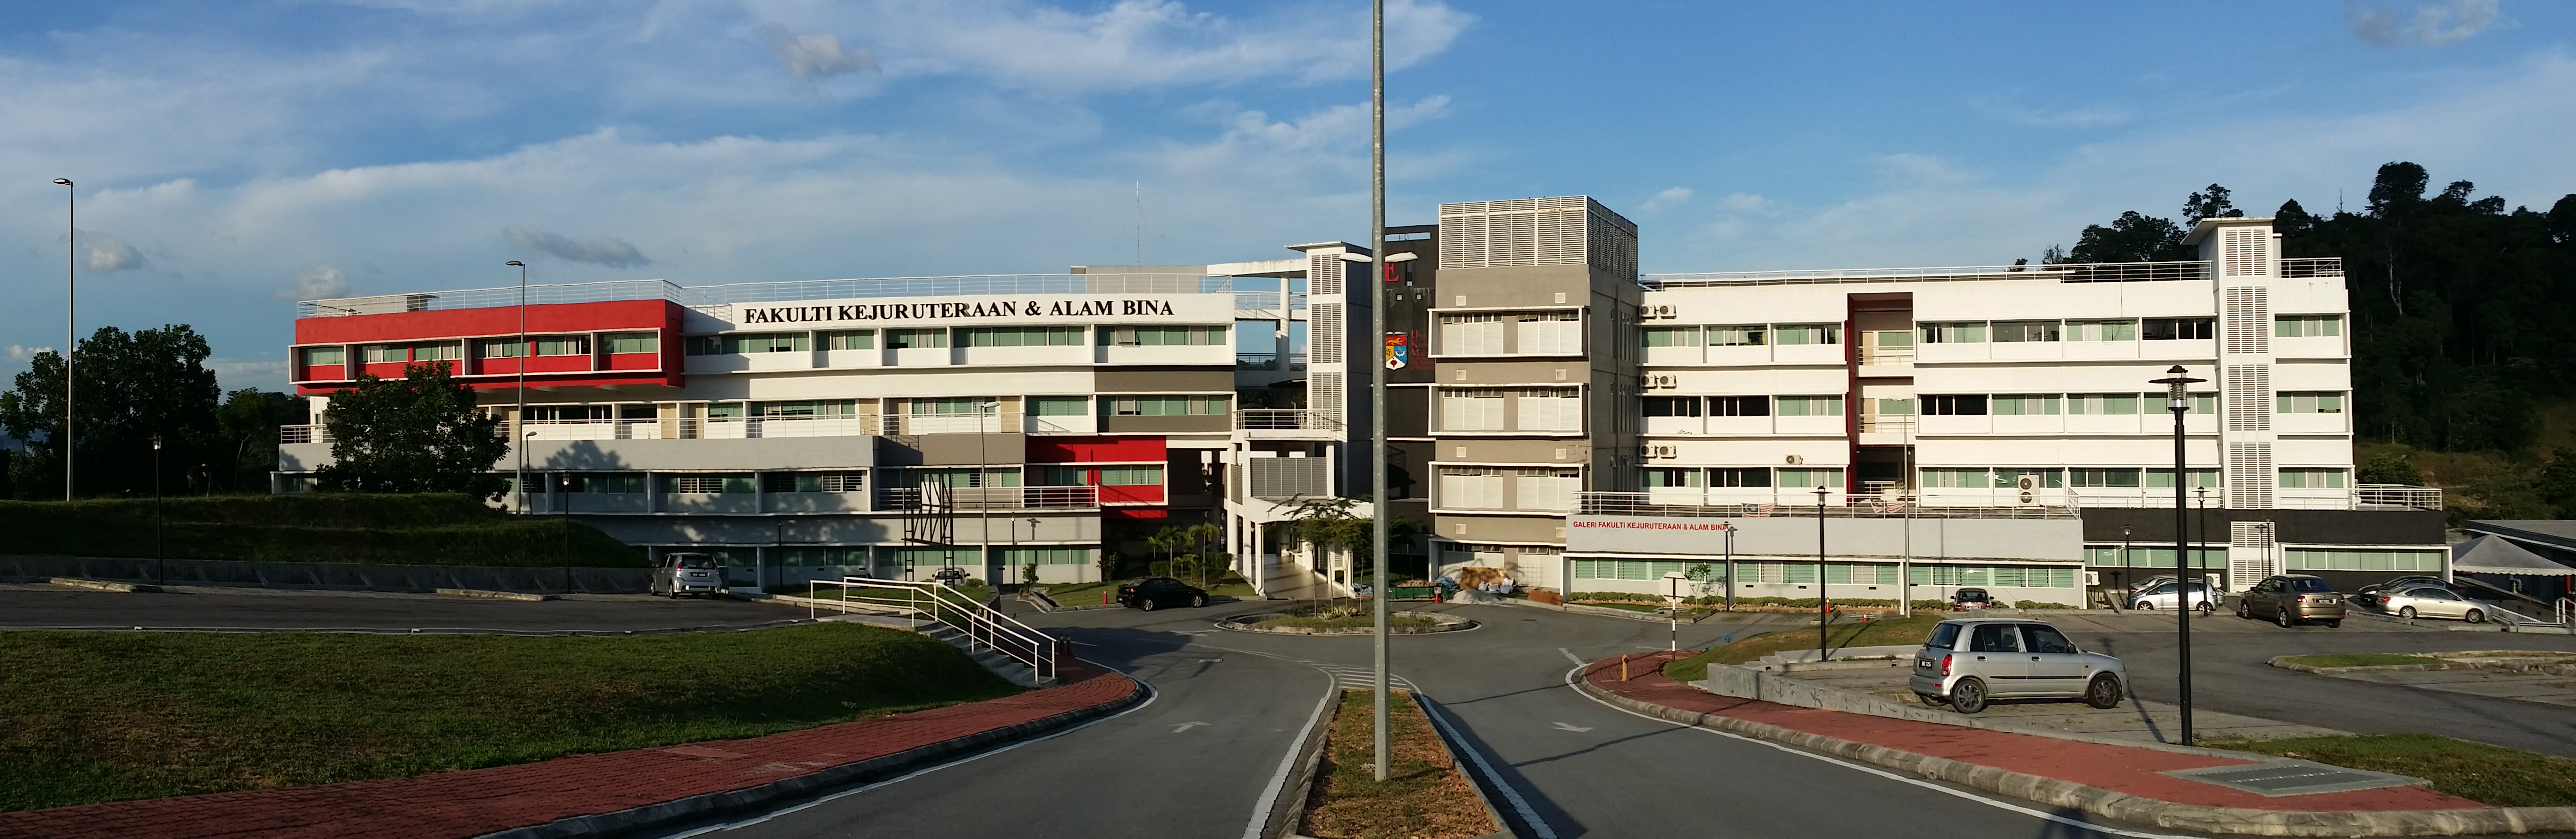 UKM's Faculty of Engineering and Built Environment